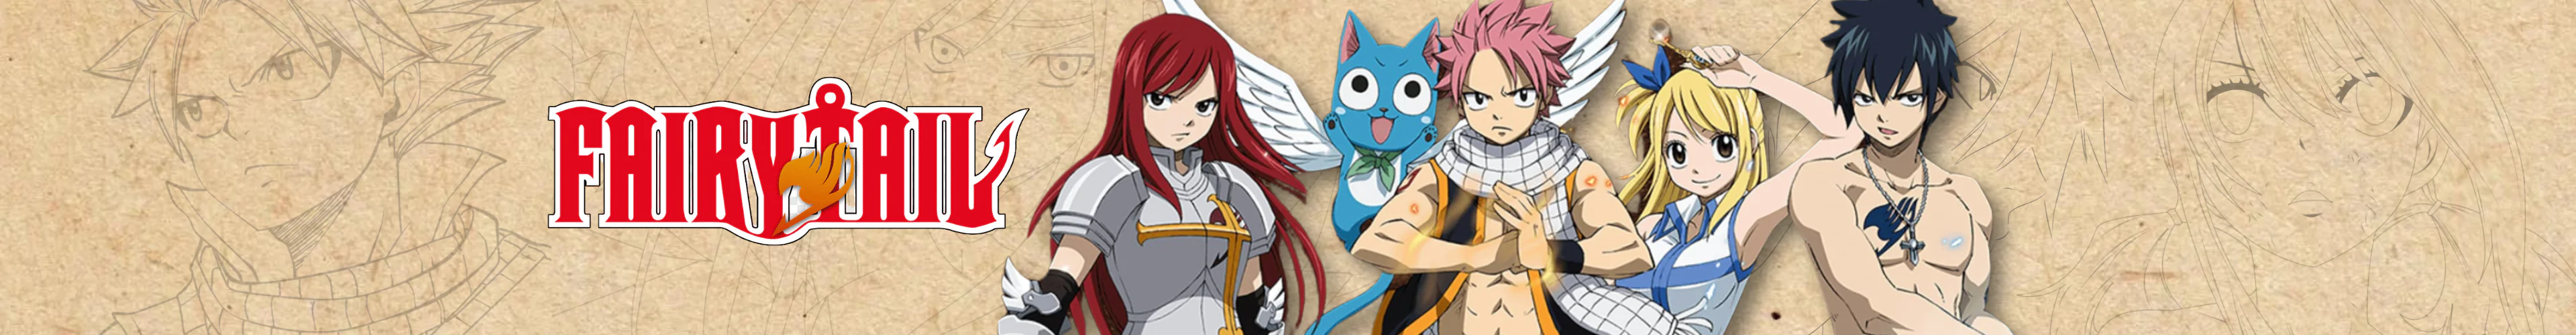 Fairy Tail stationeries  banner